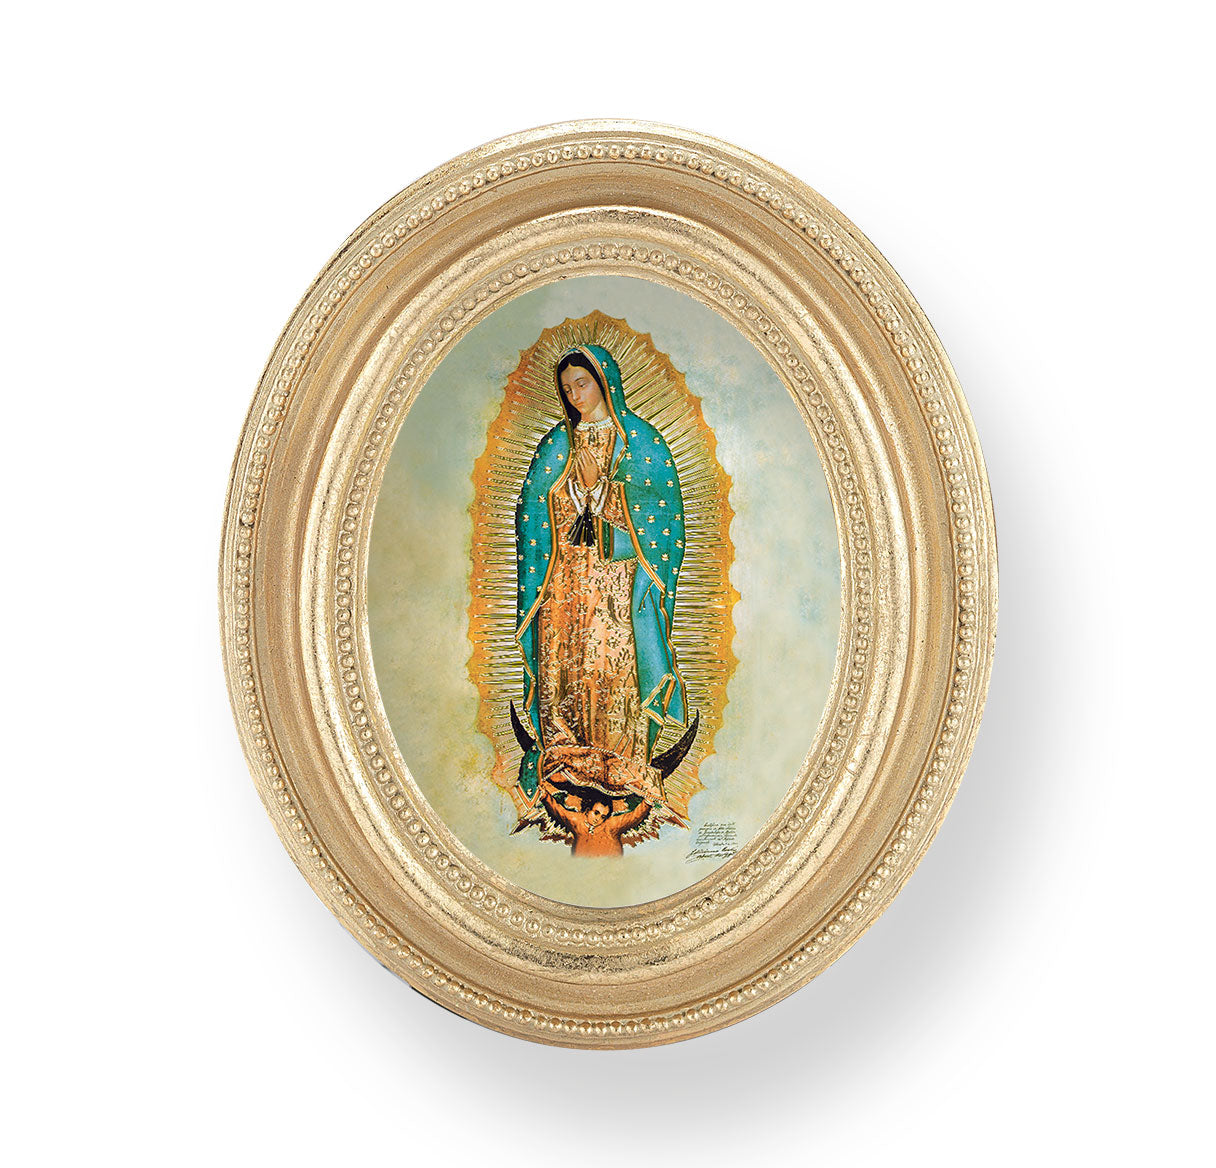 Our Lady of Guadalupe Gold Framed Print